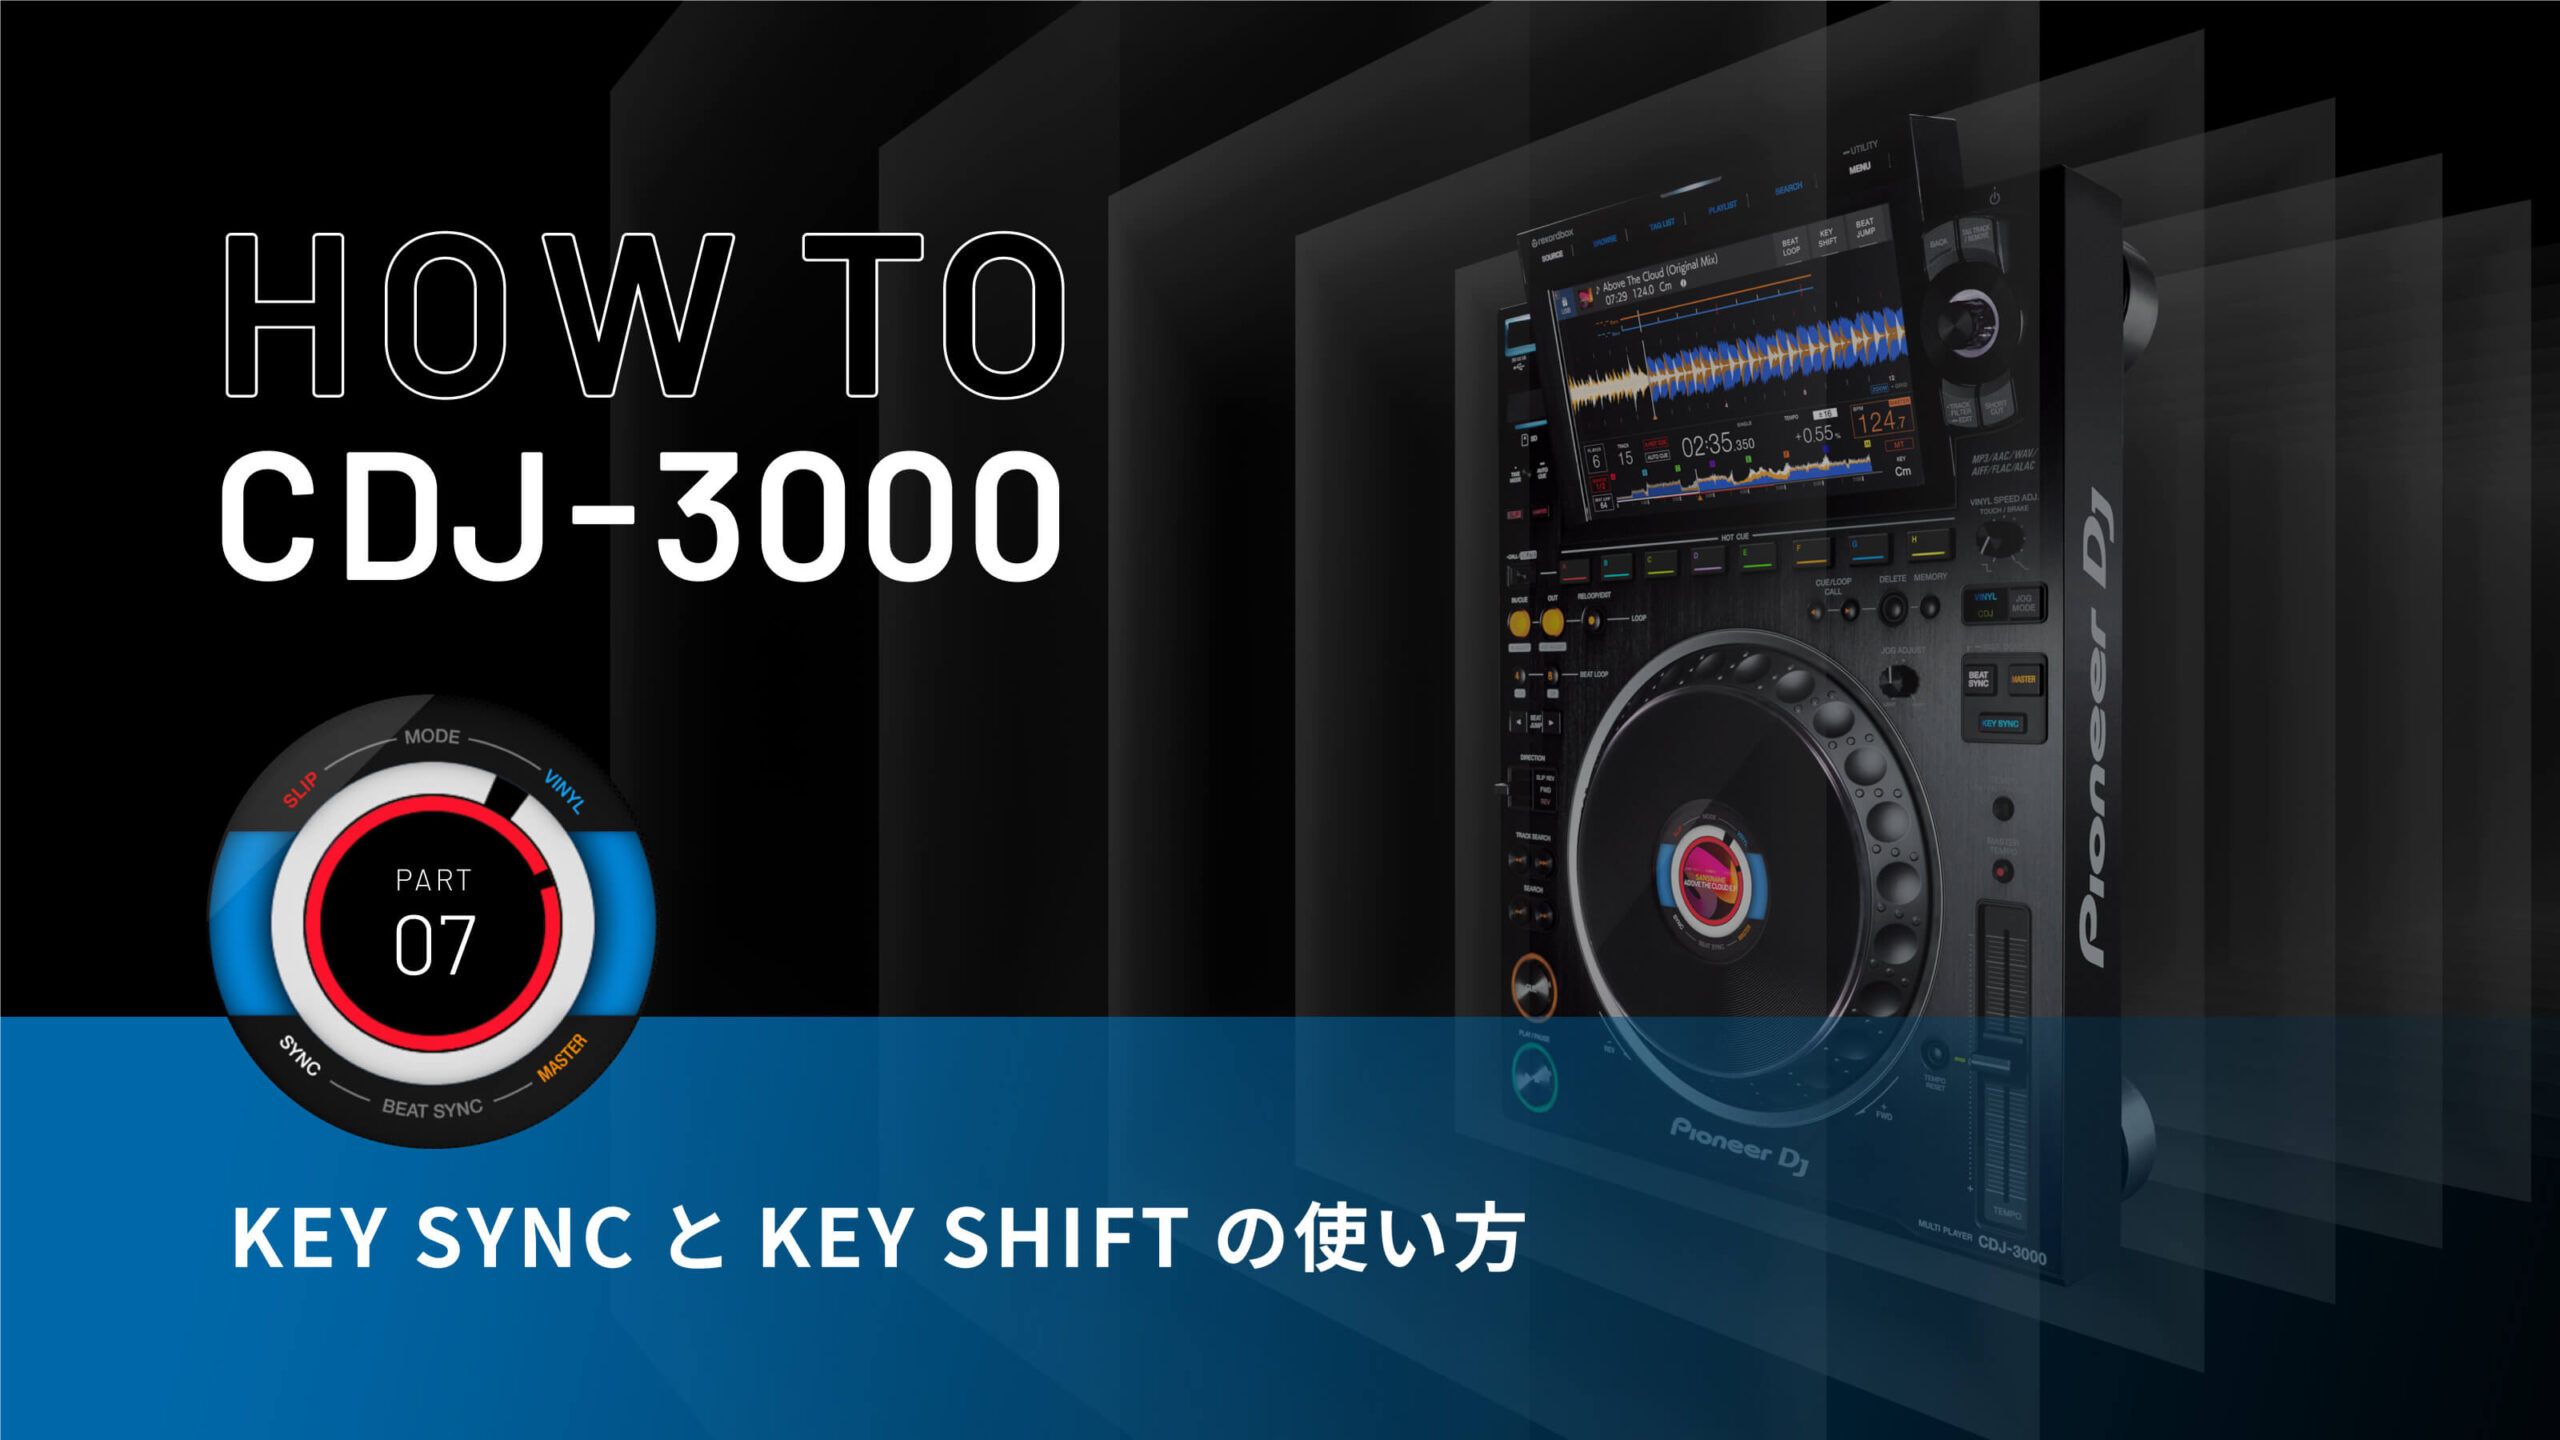 HOW TO CDJ-3000 PART07